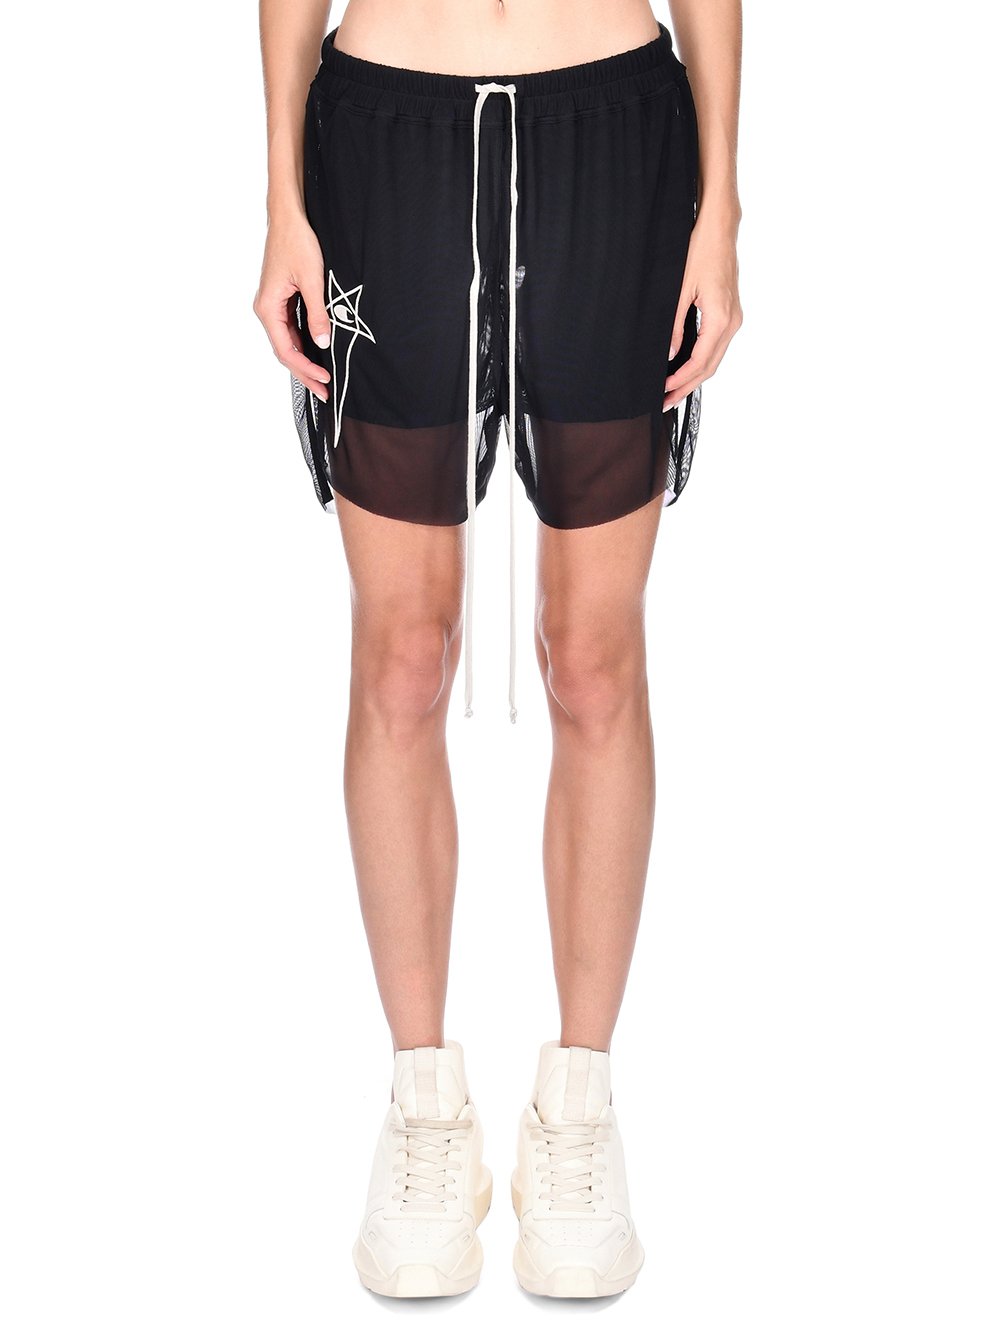 CHAMPION X RICK OWENS DOLPHIN BOXERS IN BLACK RECYCLED NYLON MICROMESH